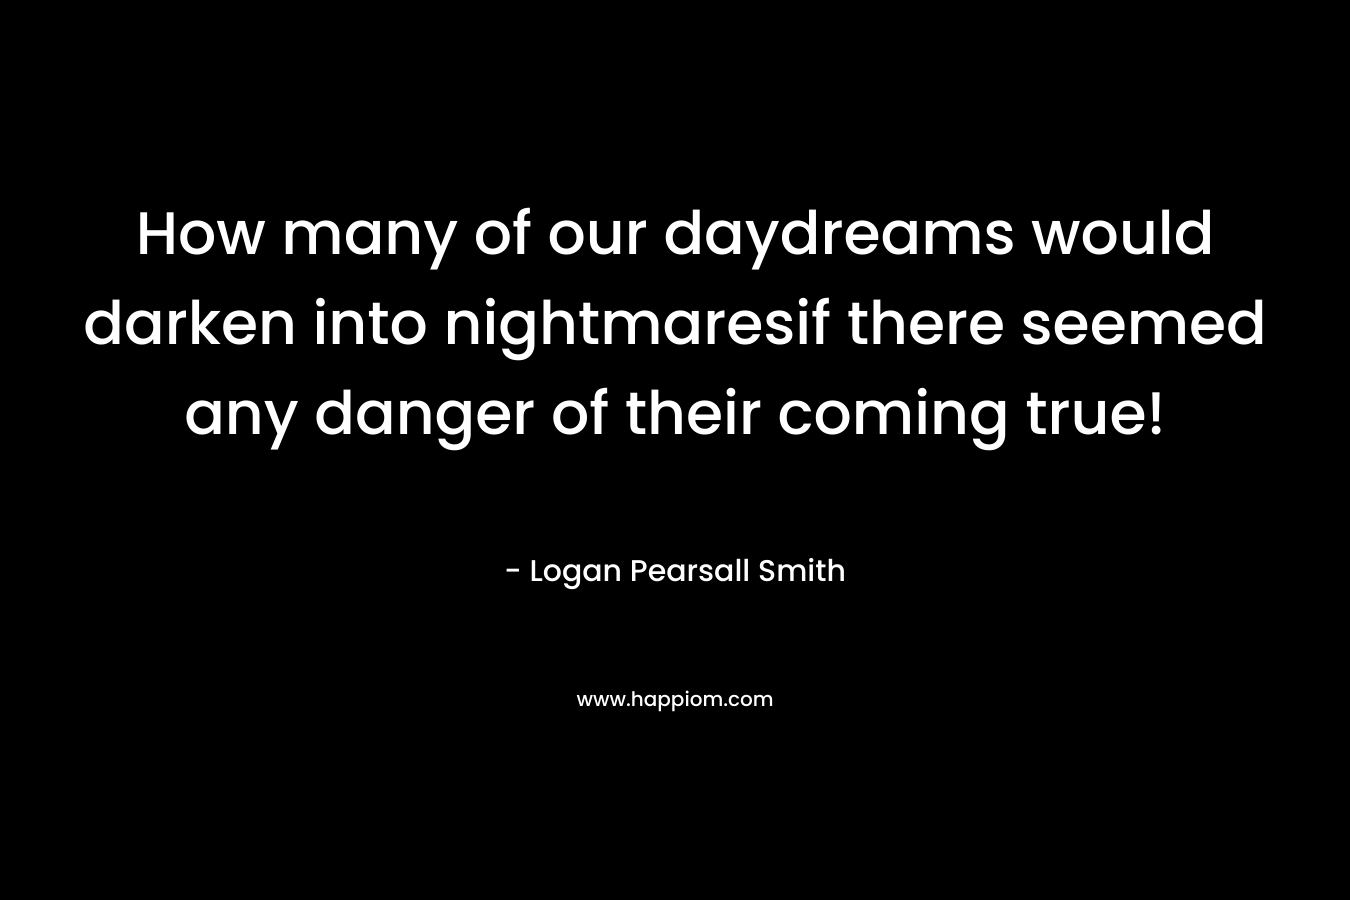 How many of our daydreams would darken into nightmaresif there seemed any danger of their coming true! – Logan Pearsall Smith